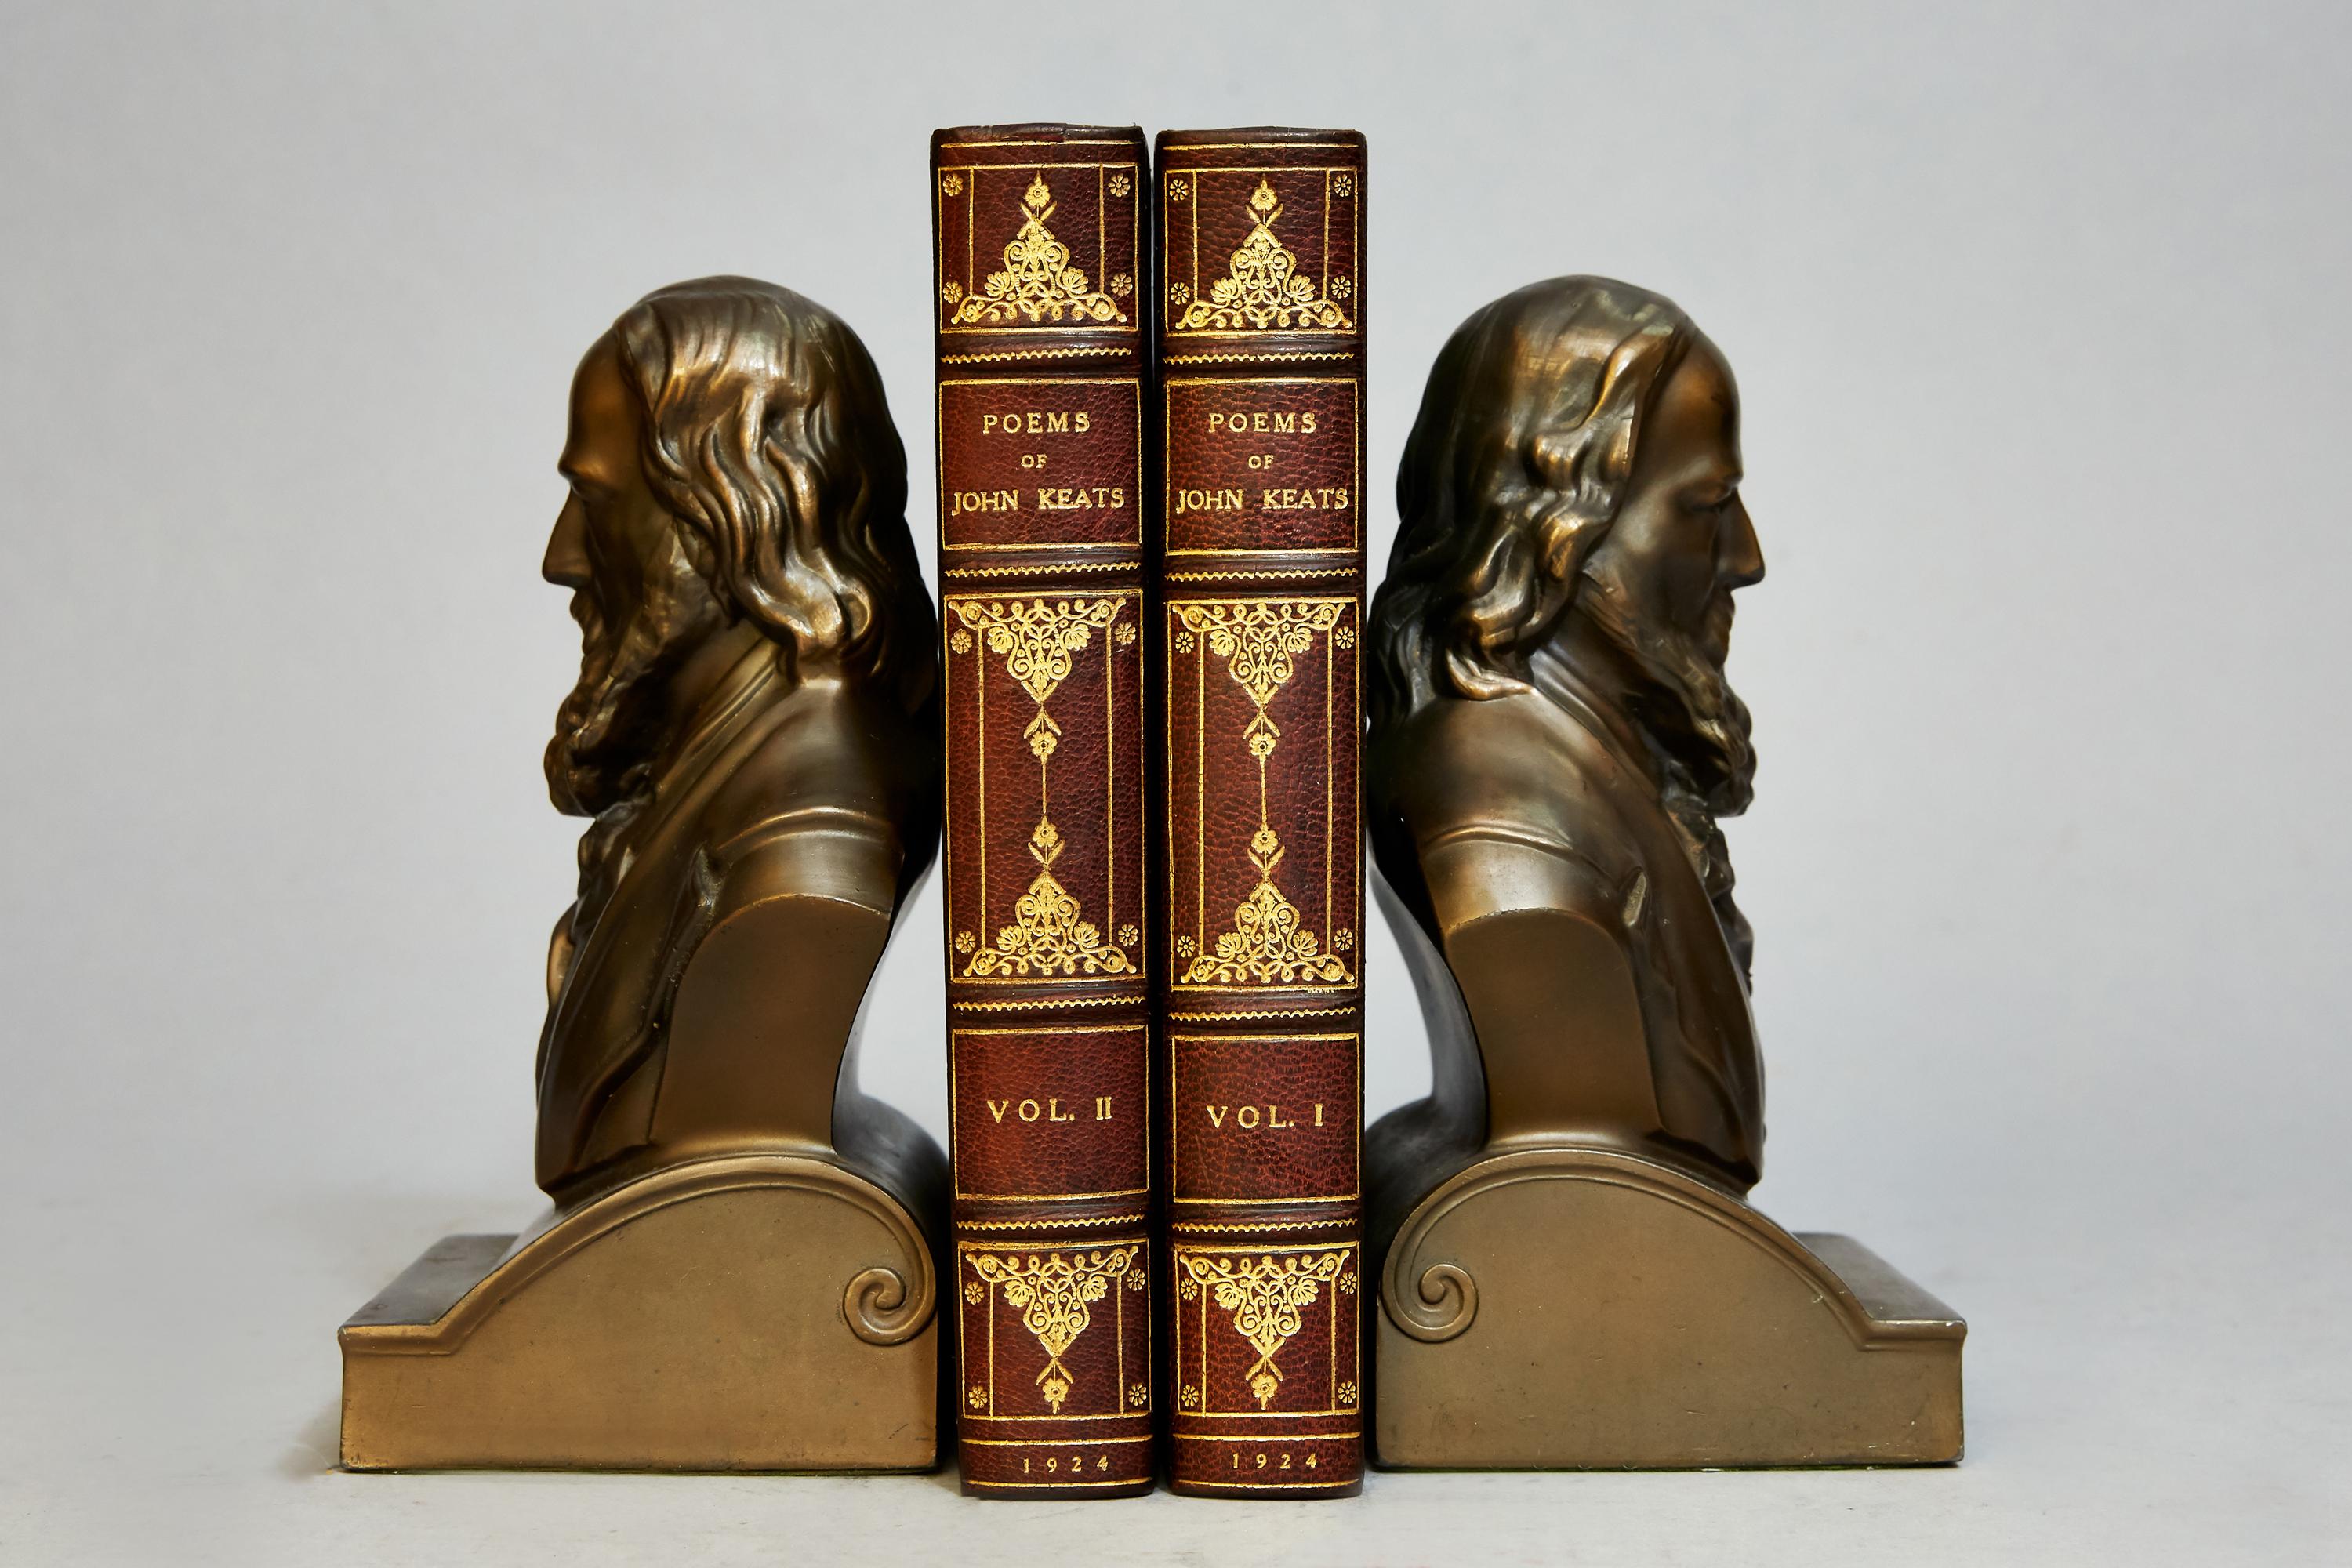 2 volumes

Bound in 3/4 green Morocco (spines faded to tan as usual)
Top edges gilt, raised bands, gilt panels. 

Published: New York, Brentano’s, 1924.

 